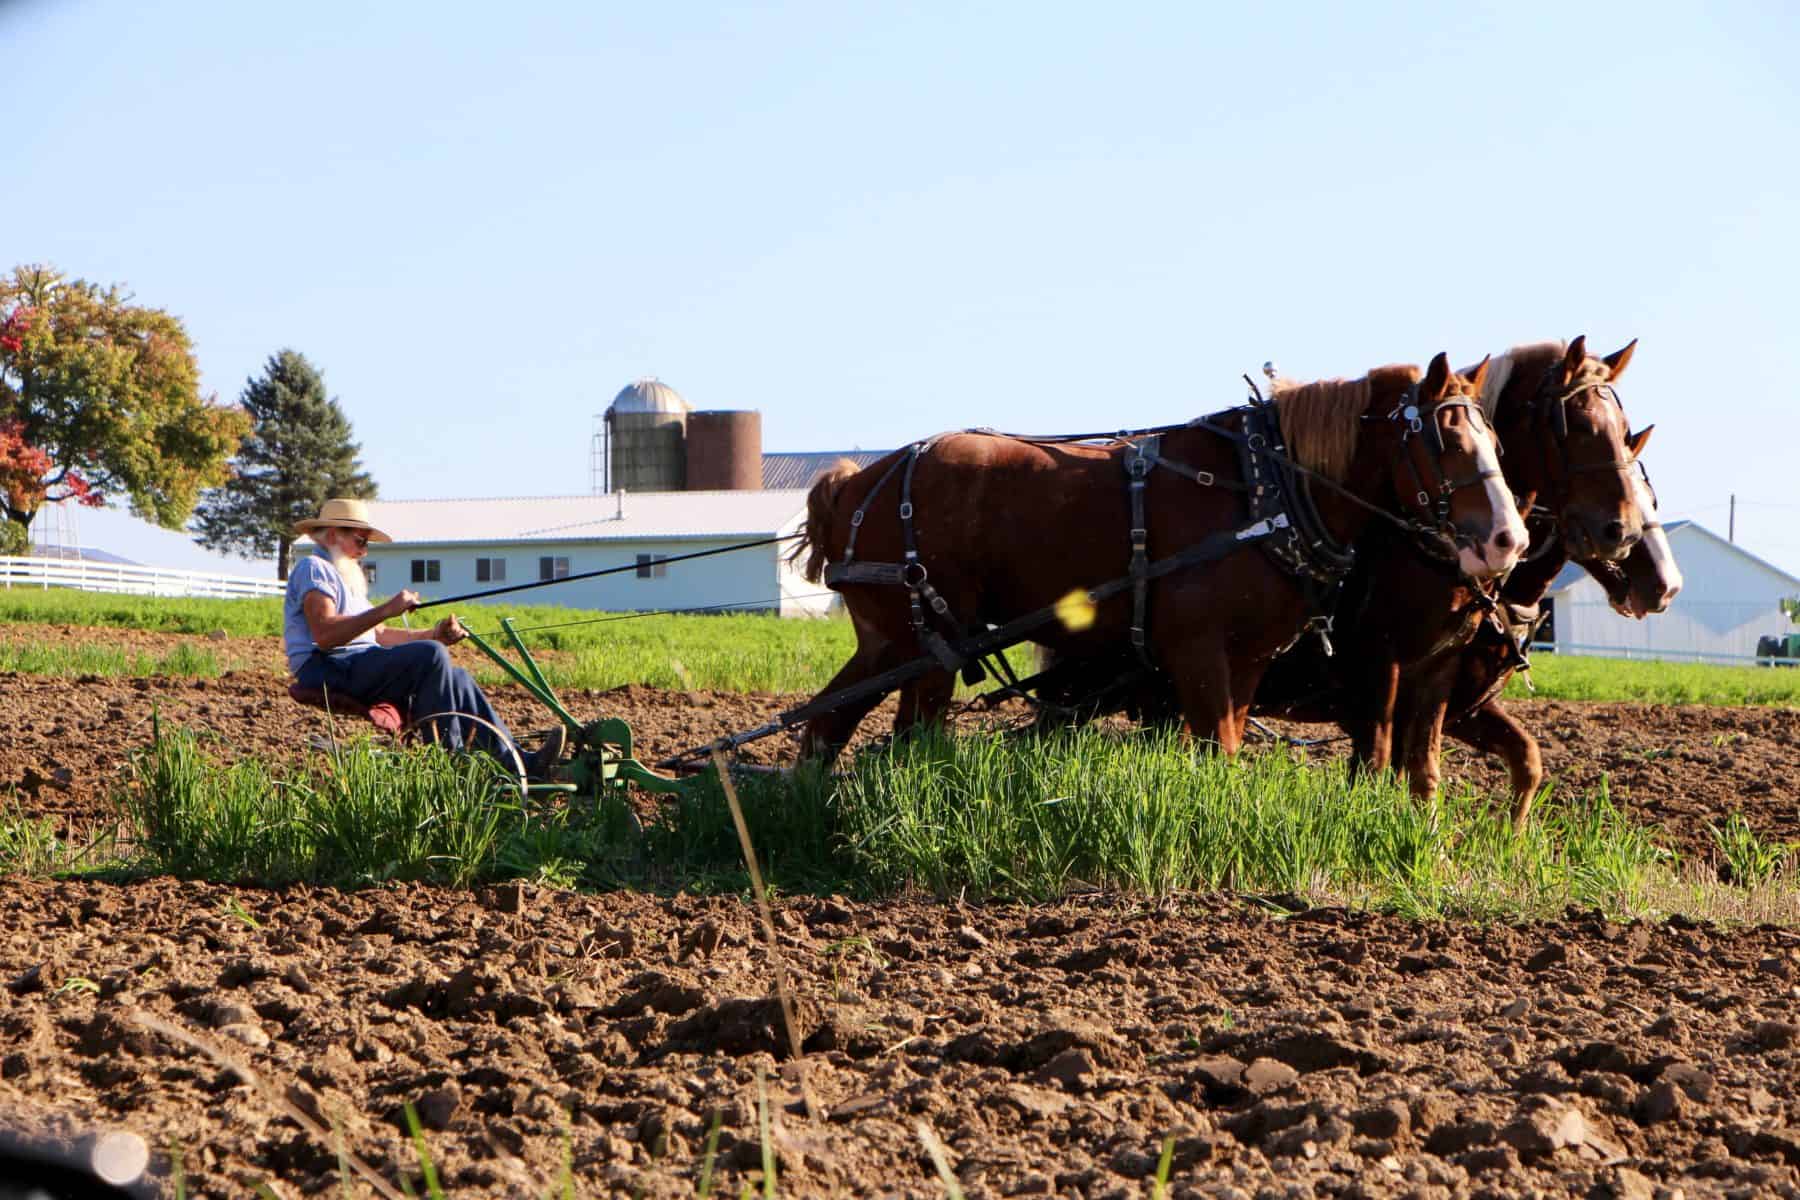 Amish farmer plowing with horses